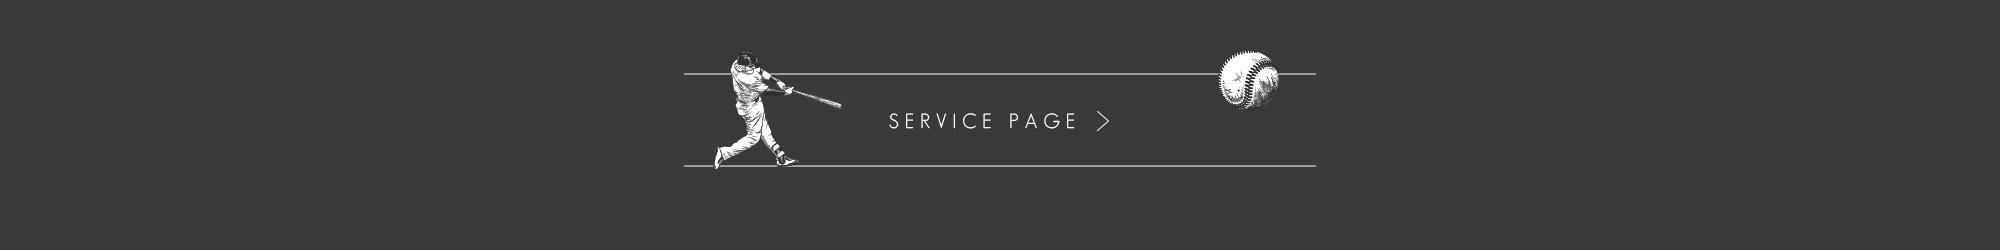 SERVICE PAGE